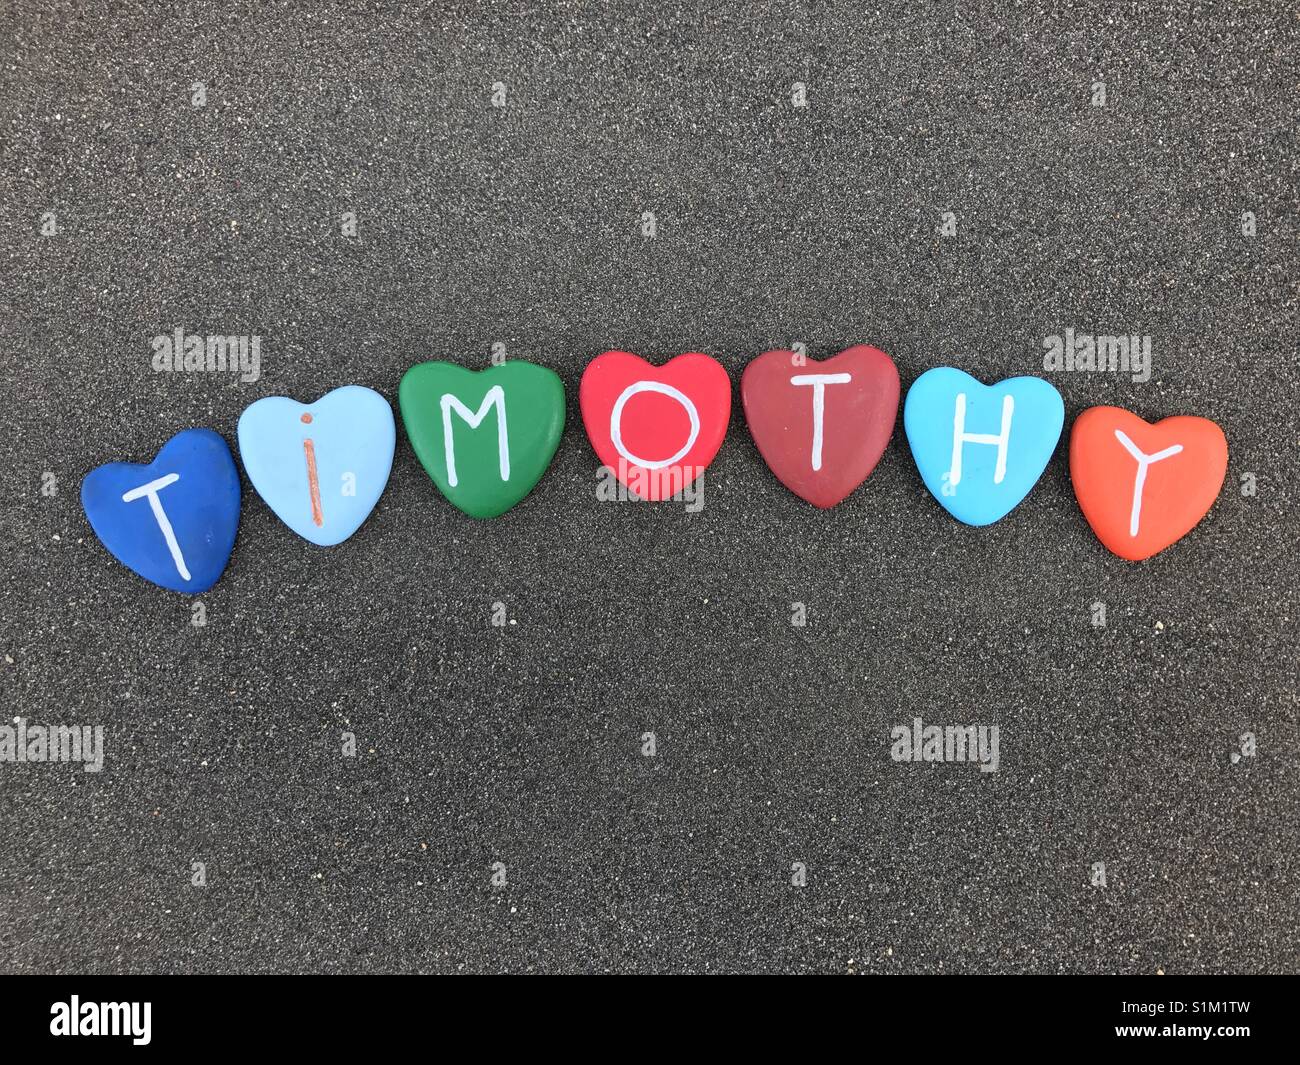 Timothy, masculine name with colored heart stones over black volcanic sand Stock Photo